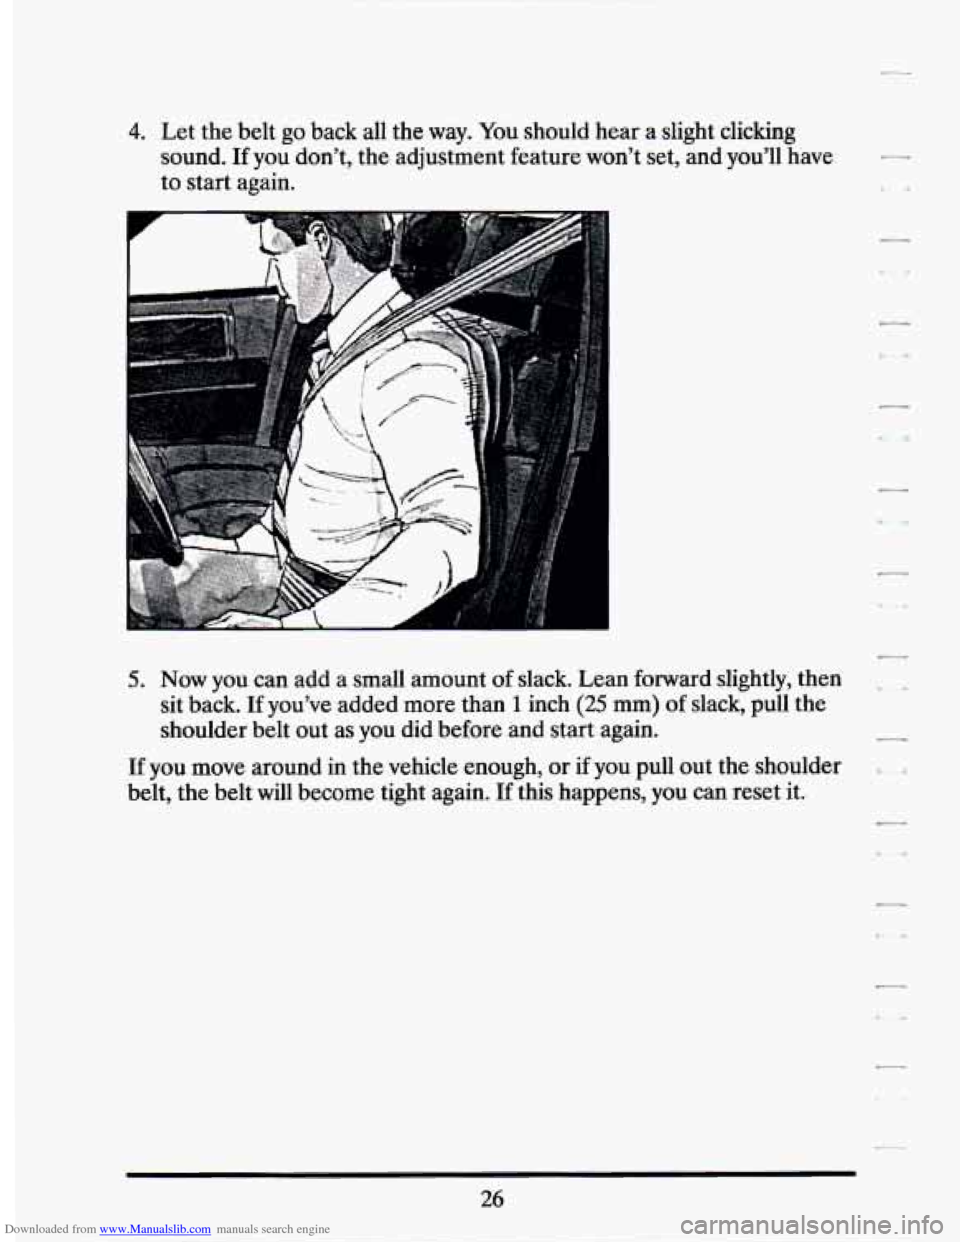 CADILLAC SEVILLE 1994 4.G Owners Manual Downloaded from www.Manualslib.com manuals search engine 4. Let  the belt go back  all  the way.  You  should hear a  slight  clicking 
sound. 
If you  don’t,  the adjustment  feature won’t set, a